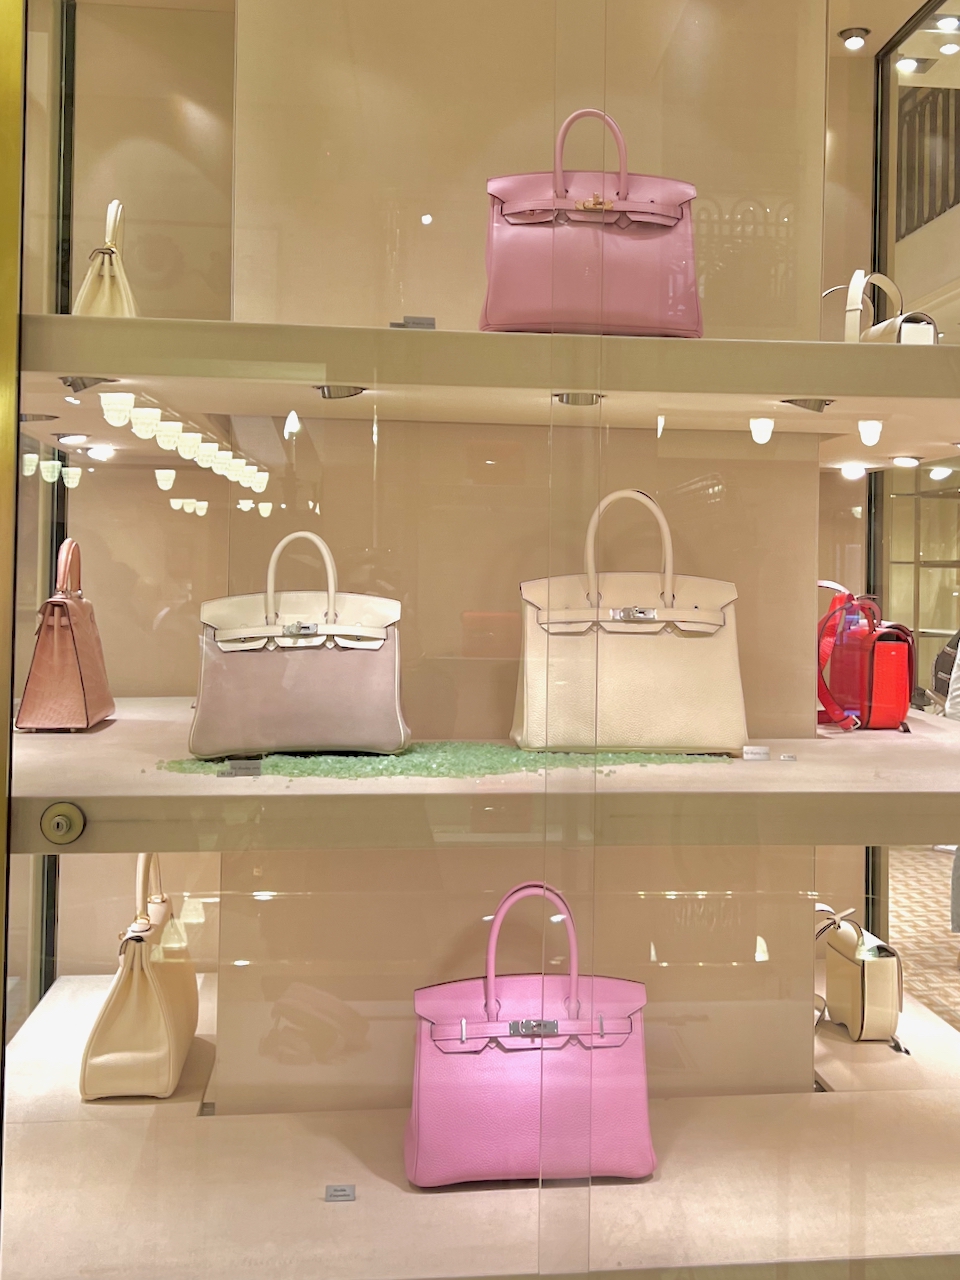 Display Bags Not for Sale at Hermès Faubourg. Photo via @The_Notorious_Pink 